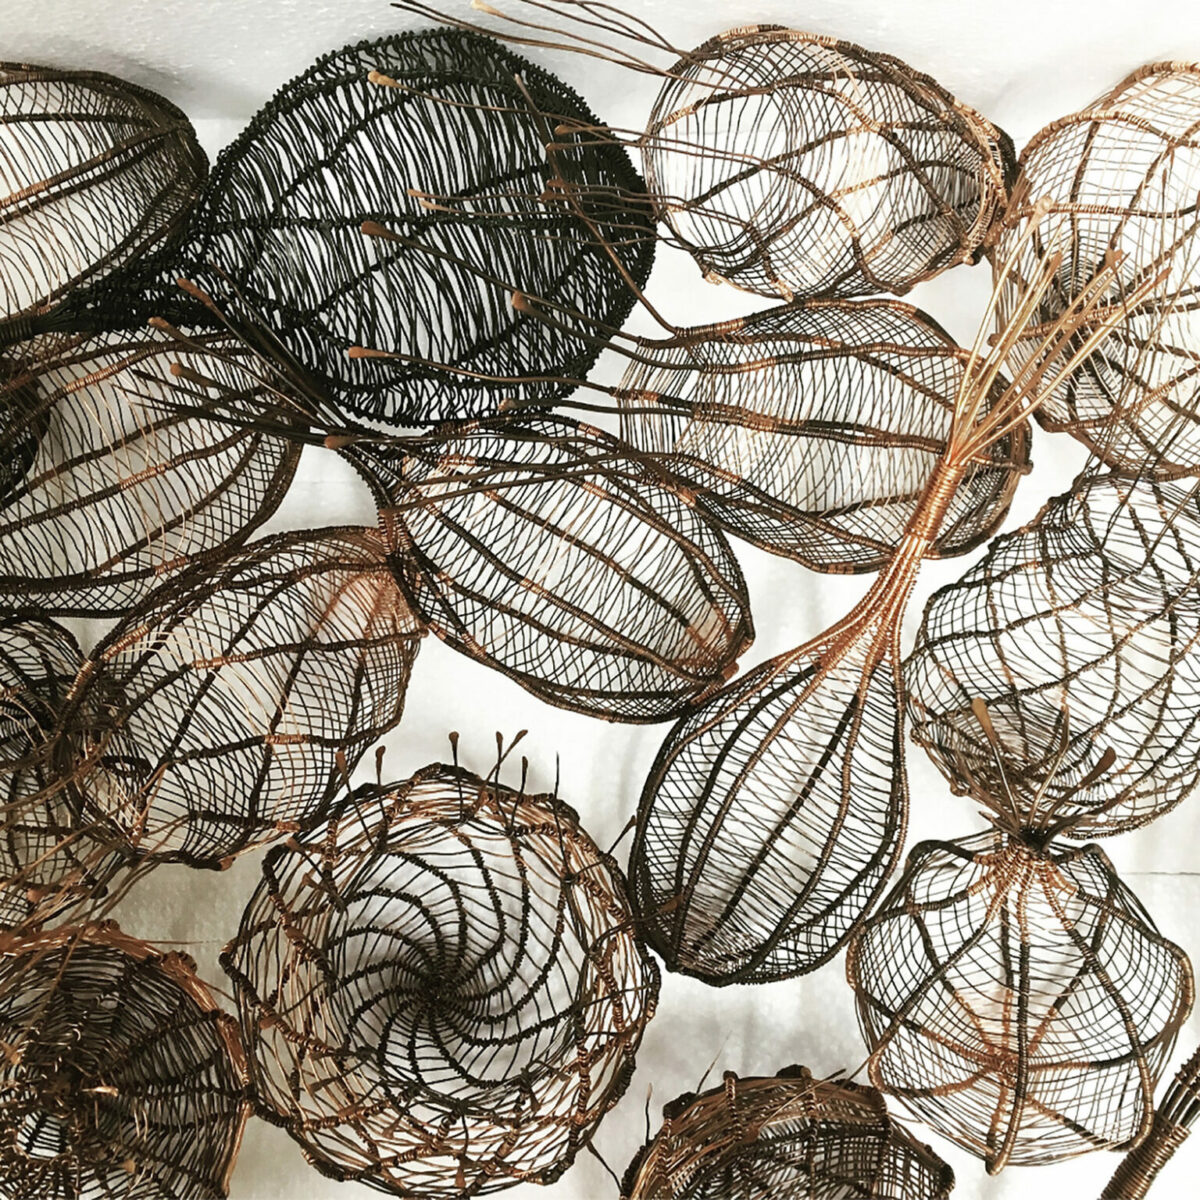 Fascinating Organic Shaped Copper Wire Sculptures By Sally Blake 13